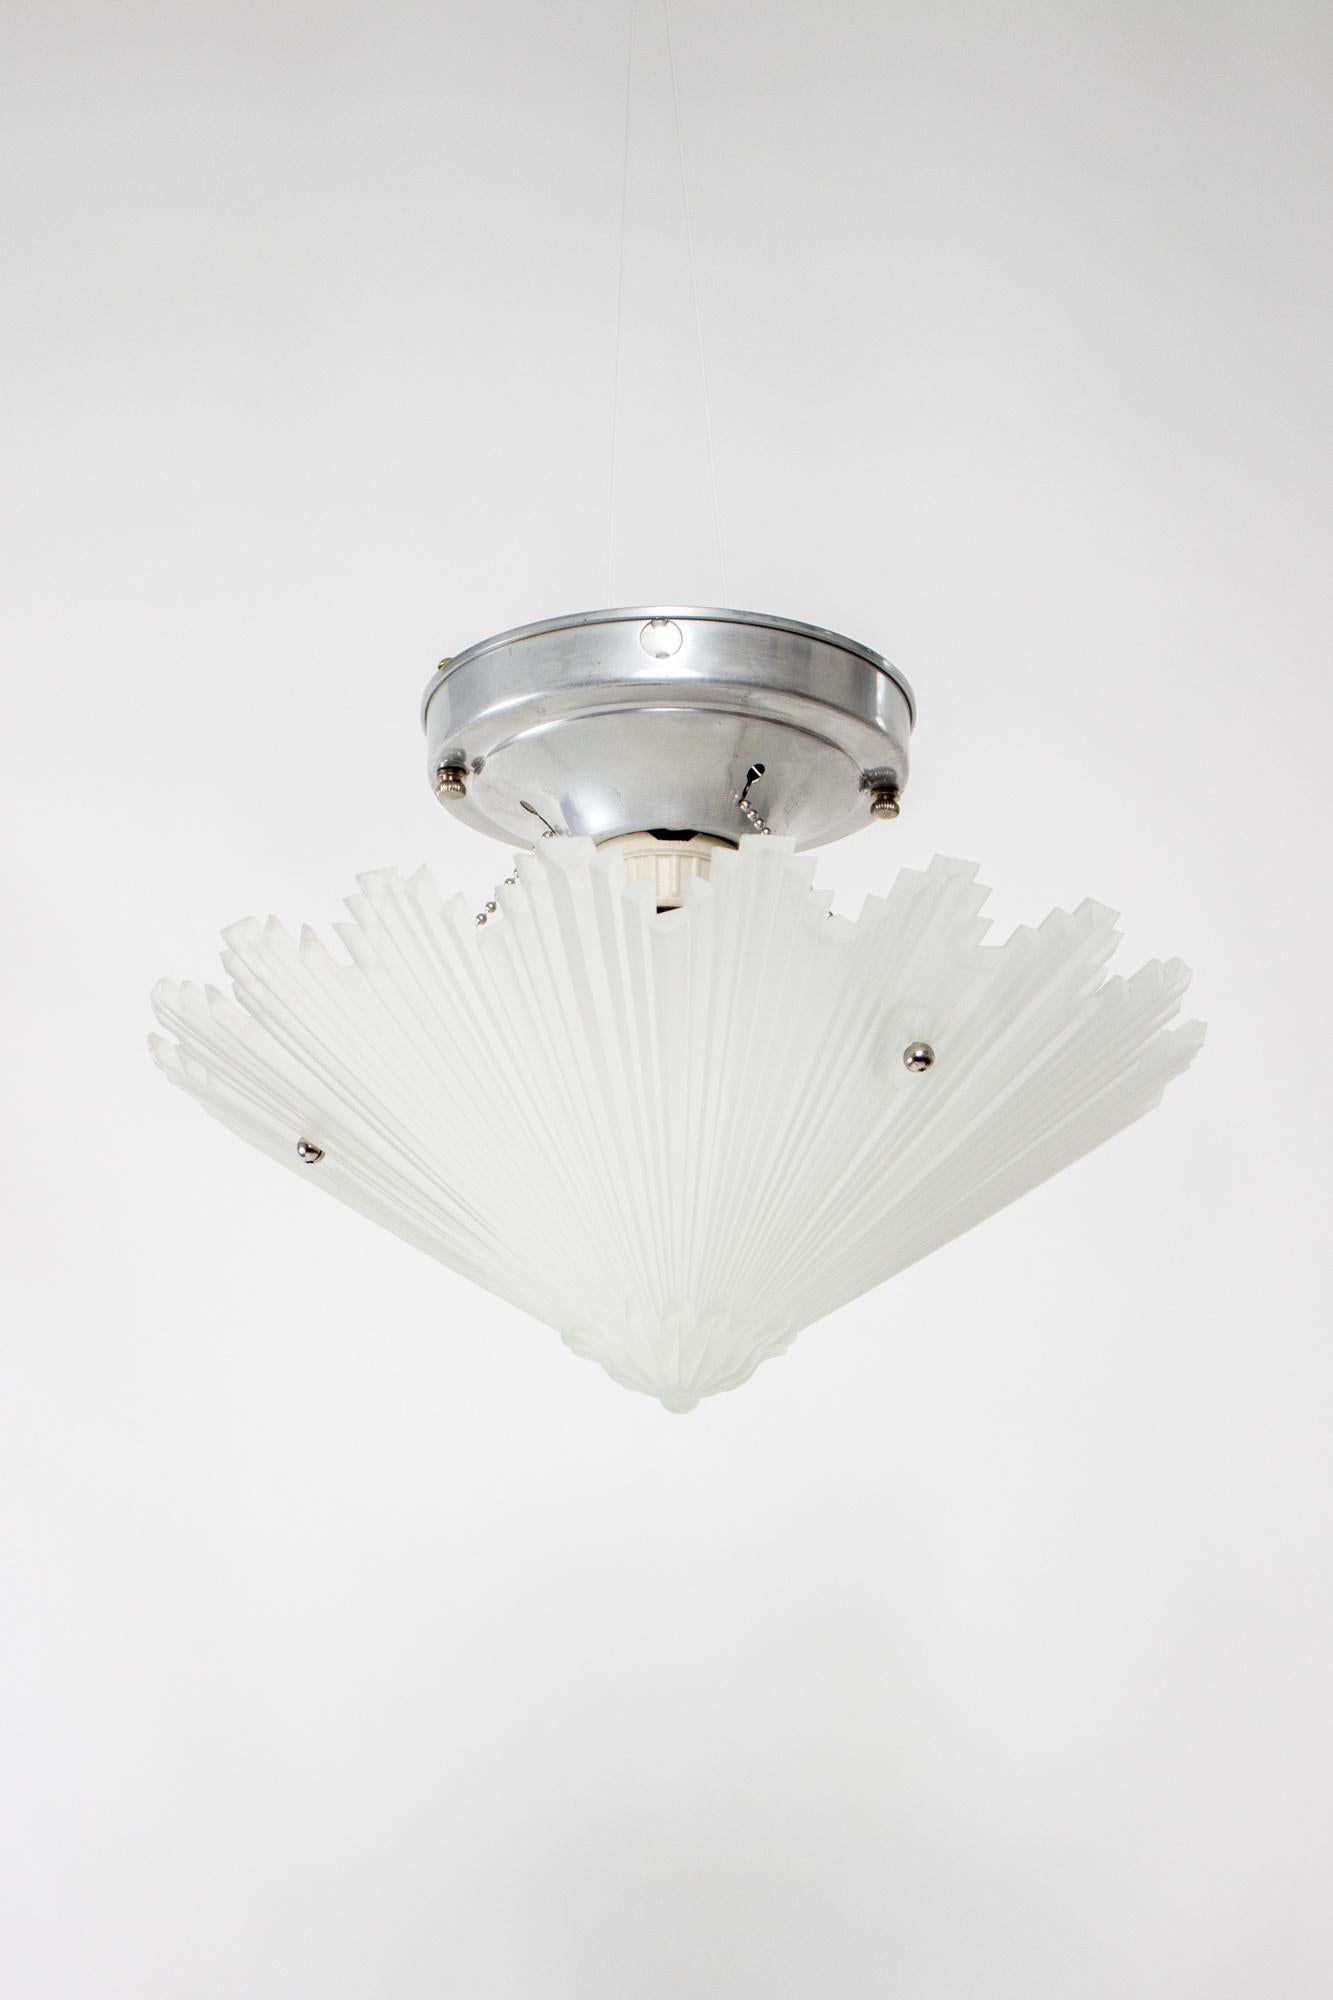 A semi flush fixture with original starburst glass. Cast frosted glass. Aluminum fixture with bead chain fitter. Rewired and ready to install. Glass is in good condition with some small chips due to it’s age, metal has the original cleaned finish.